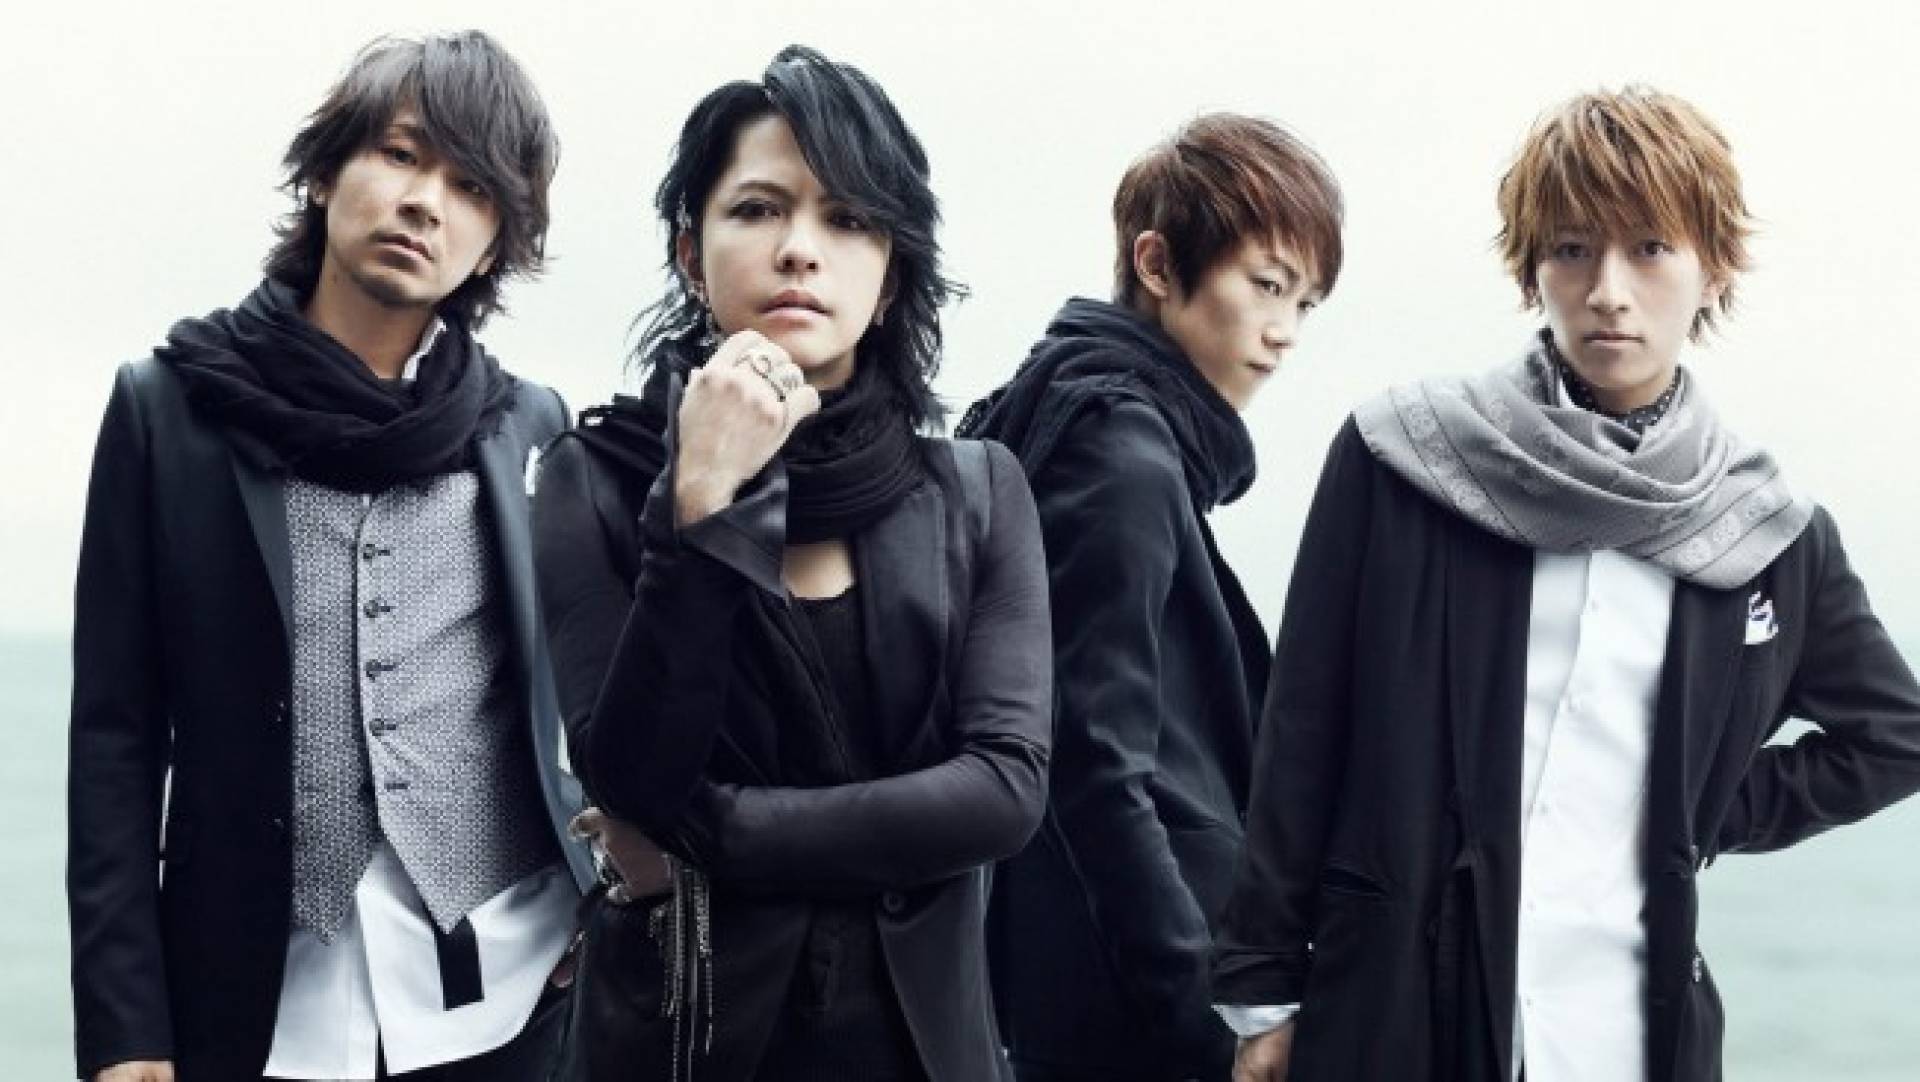 L'Arc-en-Ciel to Perform Opening Theme Song for Blue Protocol